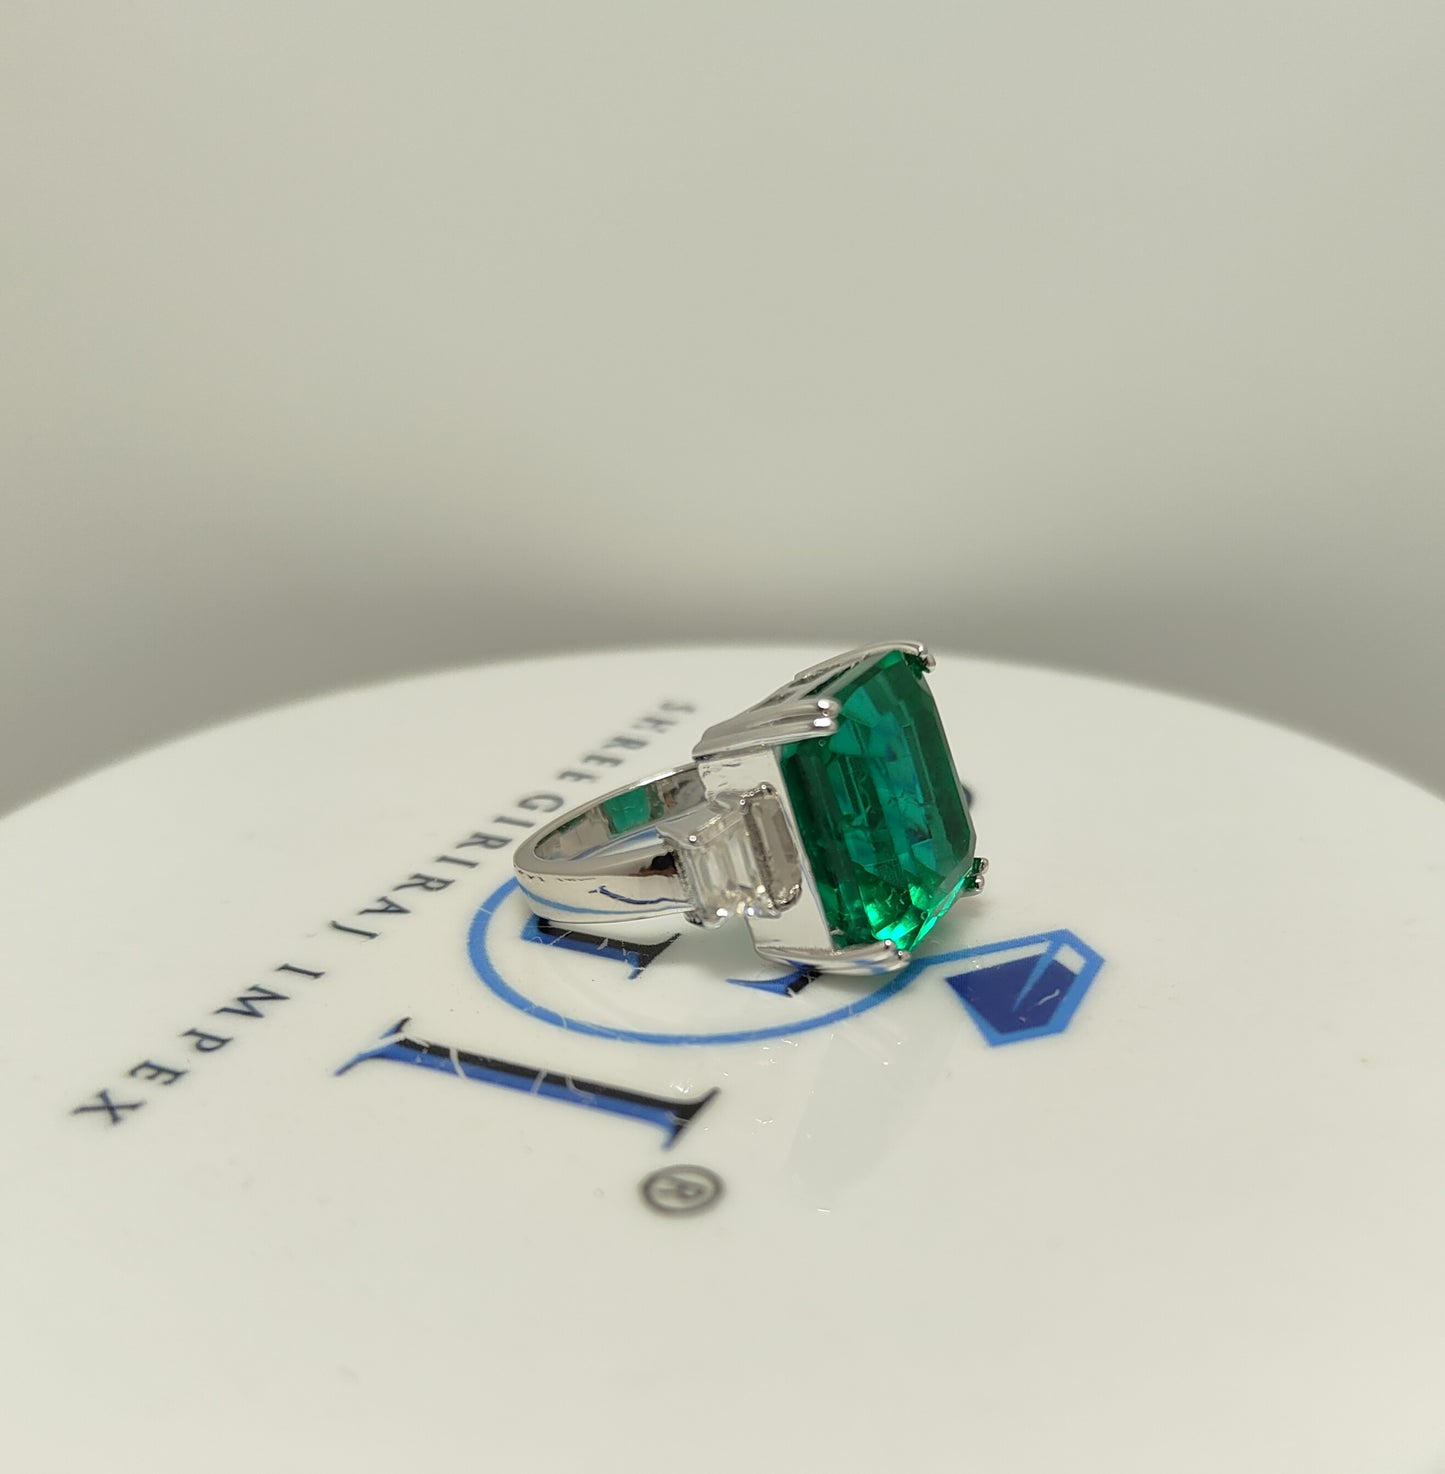 12ctw (12*14) Green Synthetic Emerald & Side White Trapazoid Cut Moissanite Diamond Mans Ring with 14k White Gold